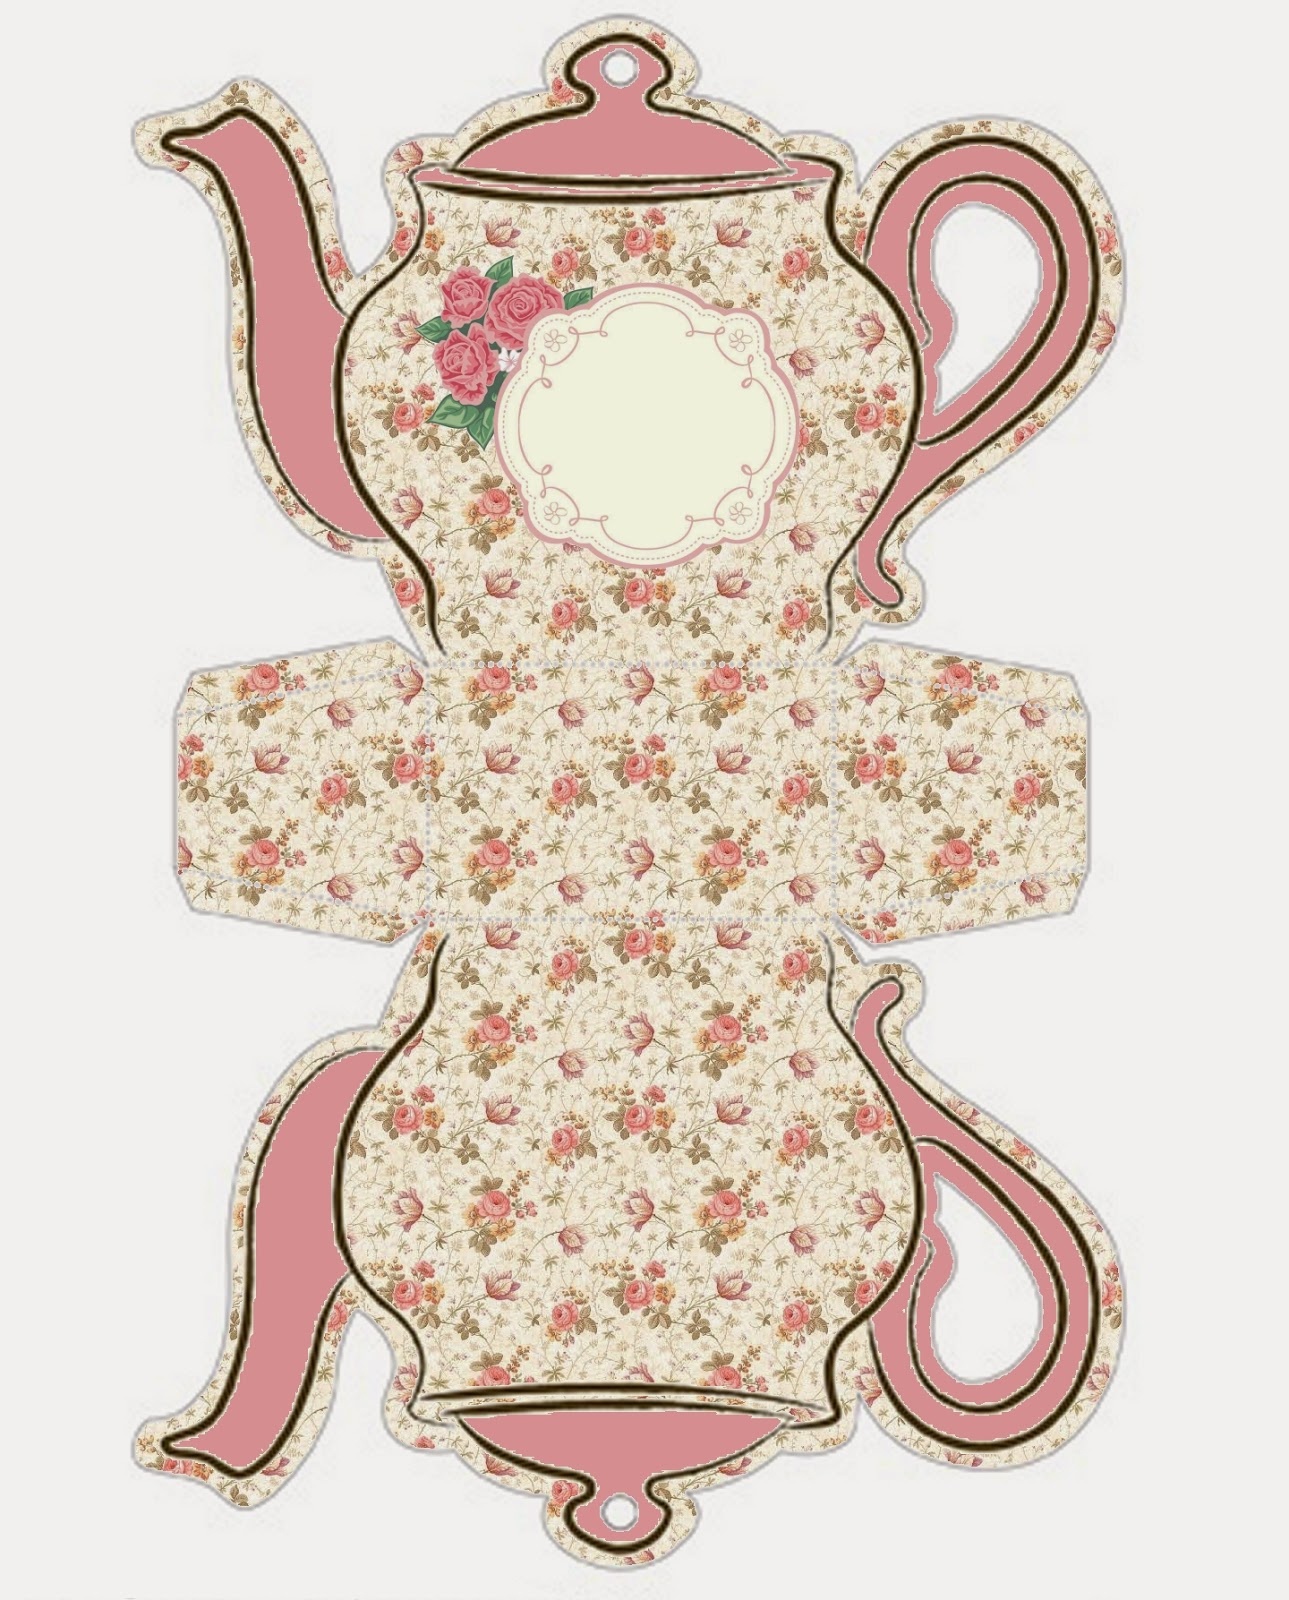 Shabby Chic Teapot Free Printable Boxes. - Oh My Fiesta! In English - Free Teapot Printable